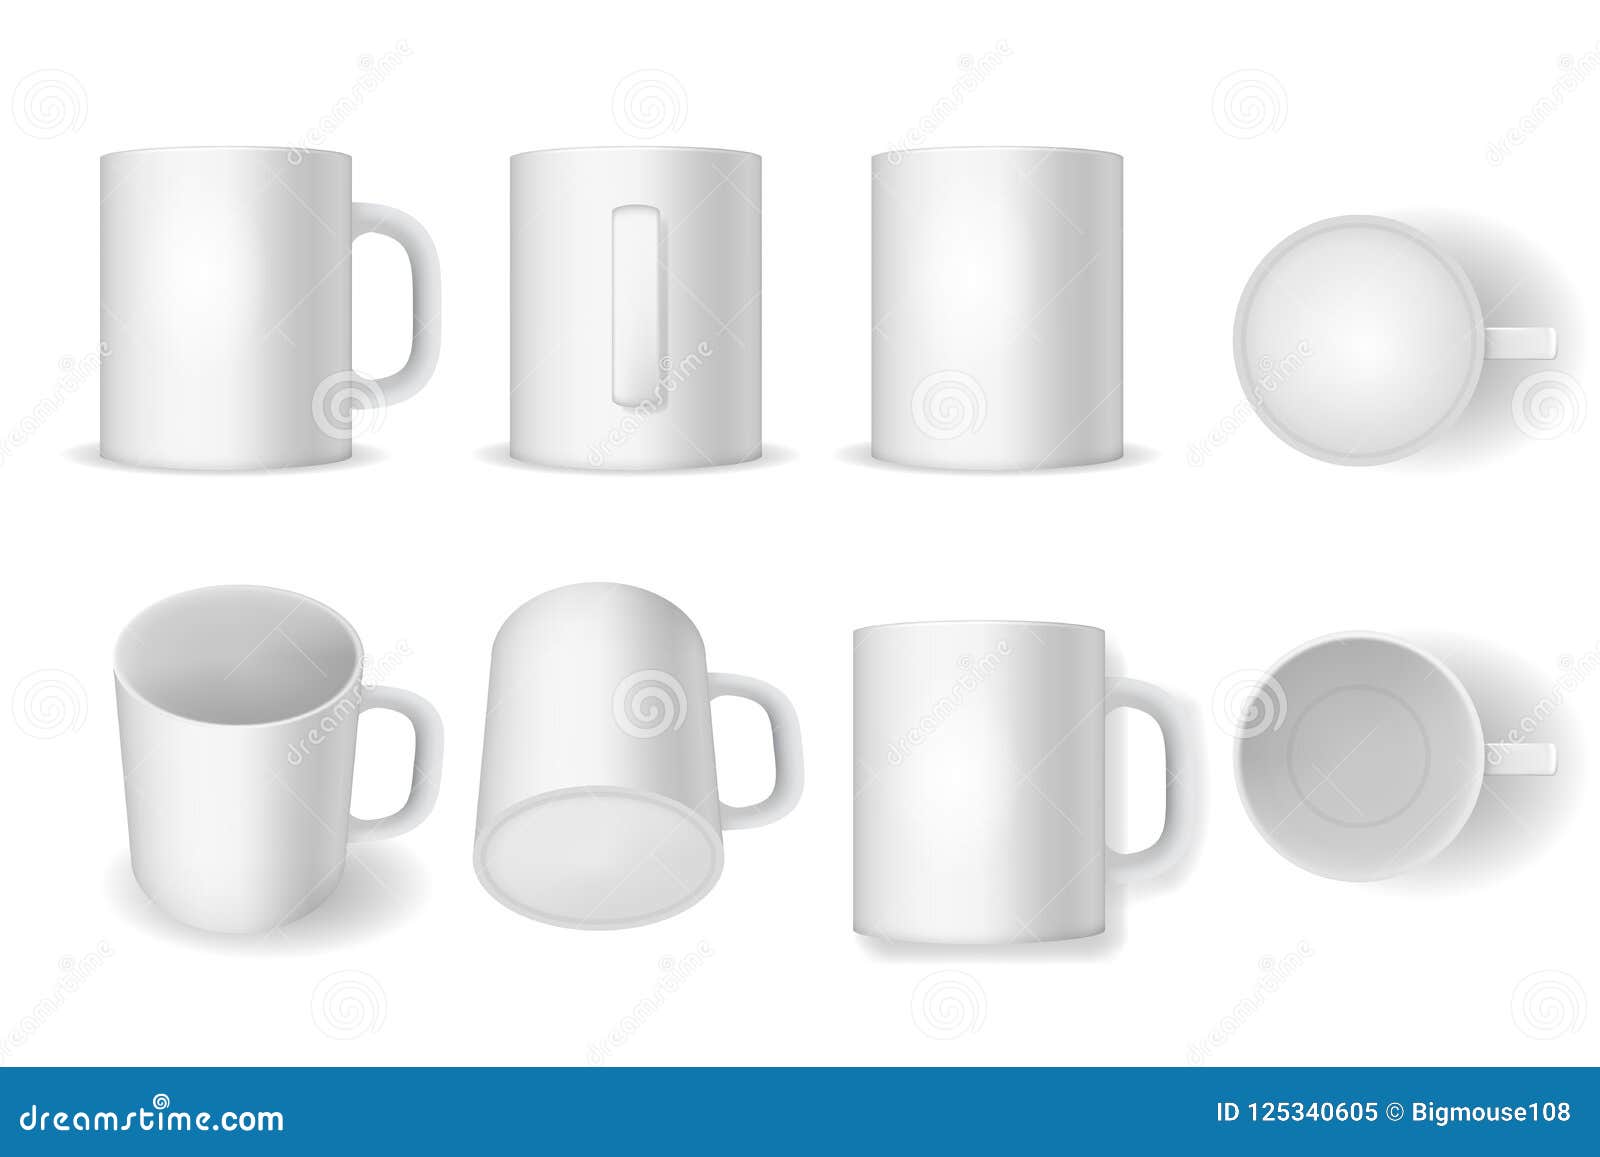 Download Realistic Detailed 3d White Blank Cup Template Mockup Set ...